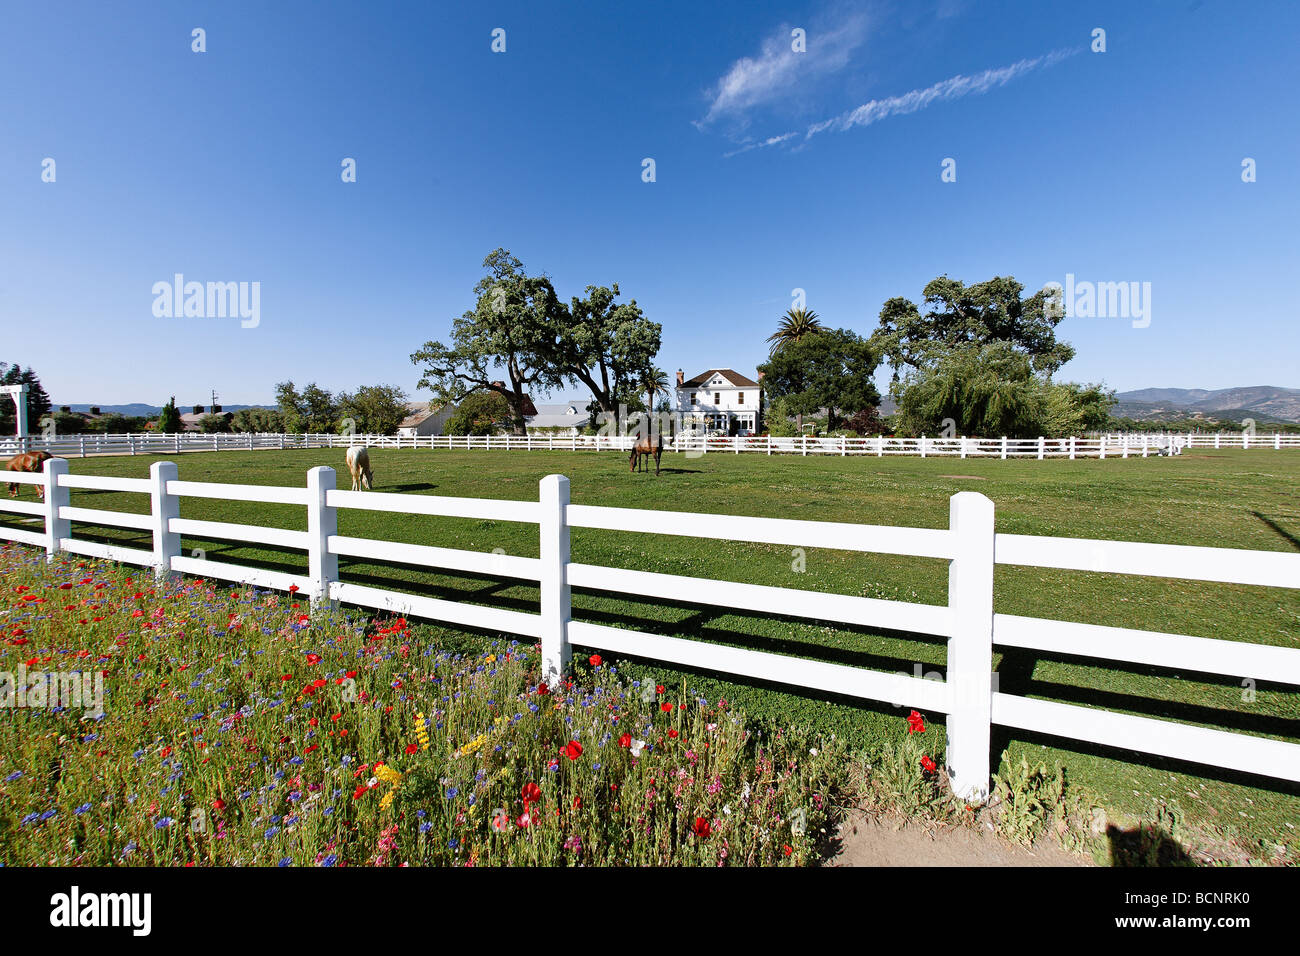 Horses Grazing in the Field during Spring Nickel and Nickel Winery Oakville Napa Valley California Stock Photo